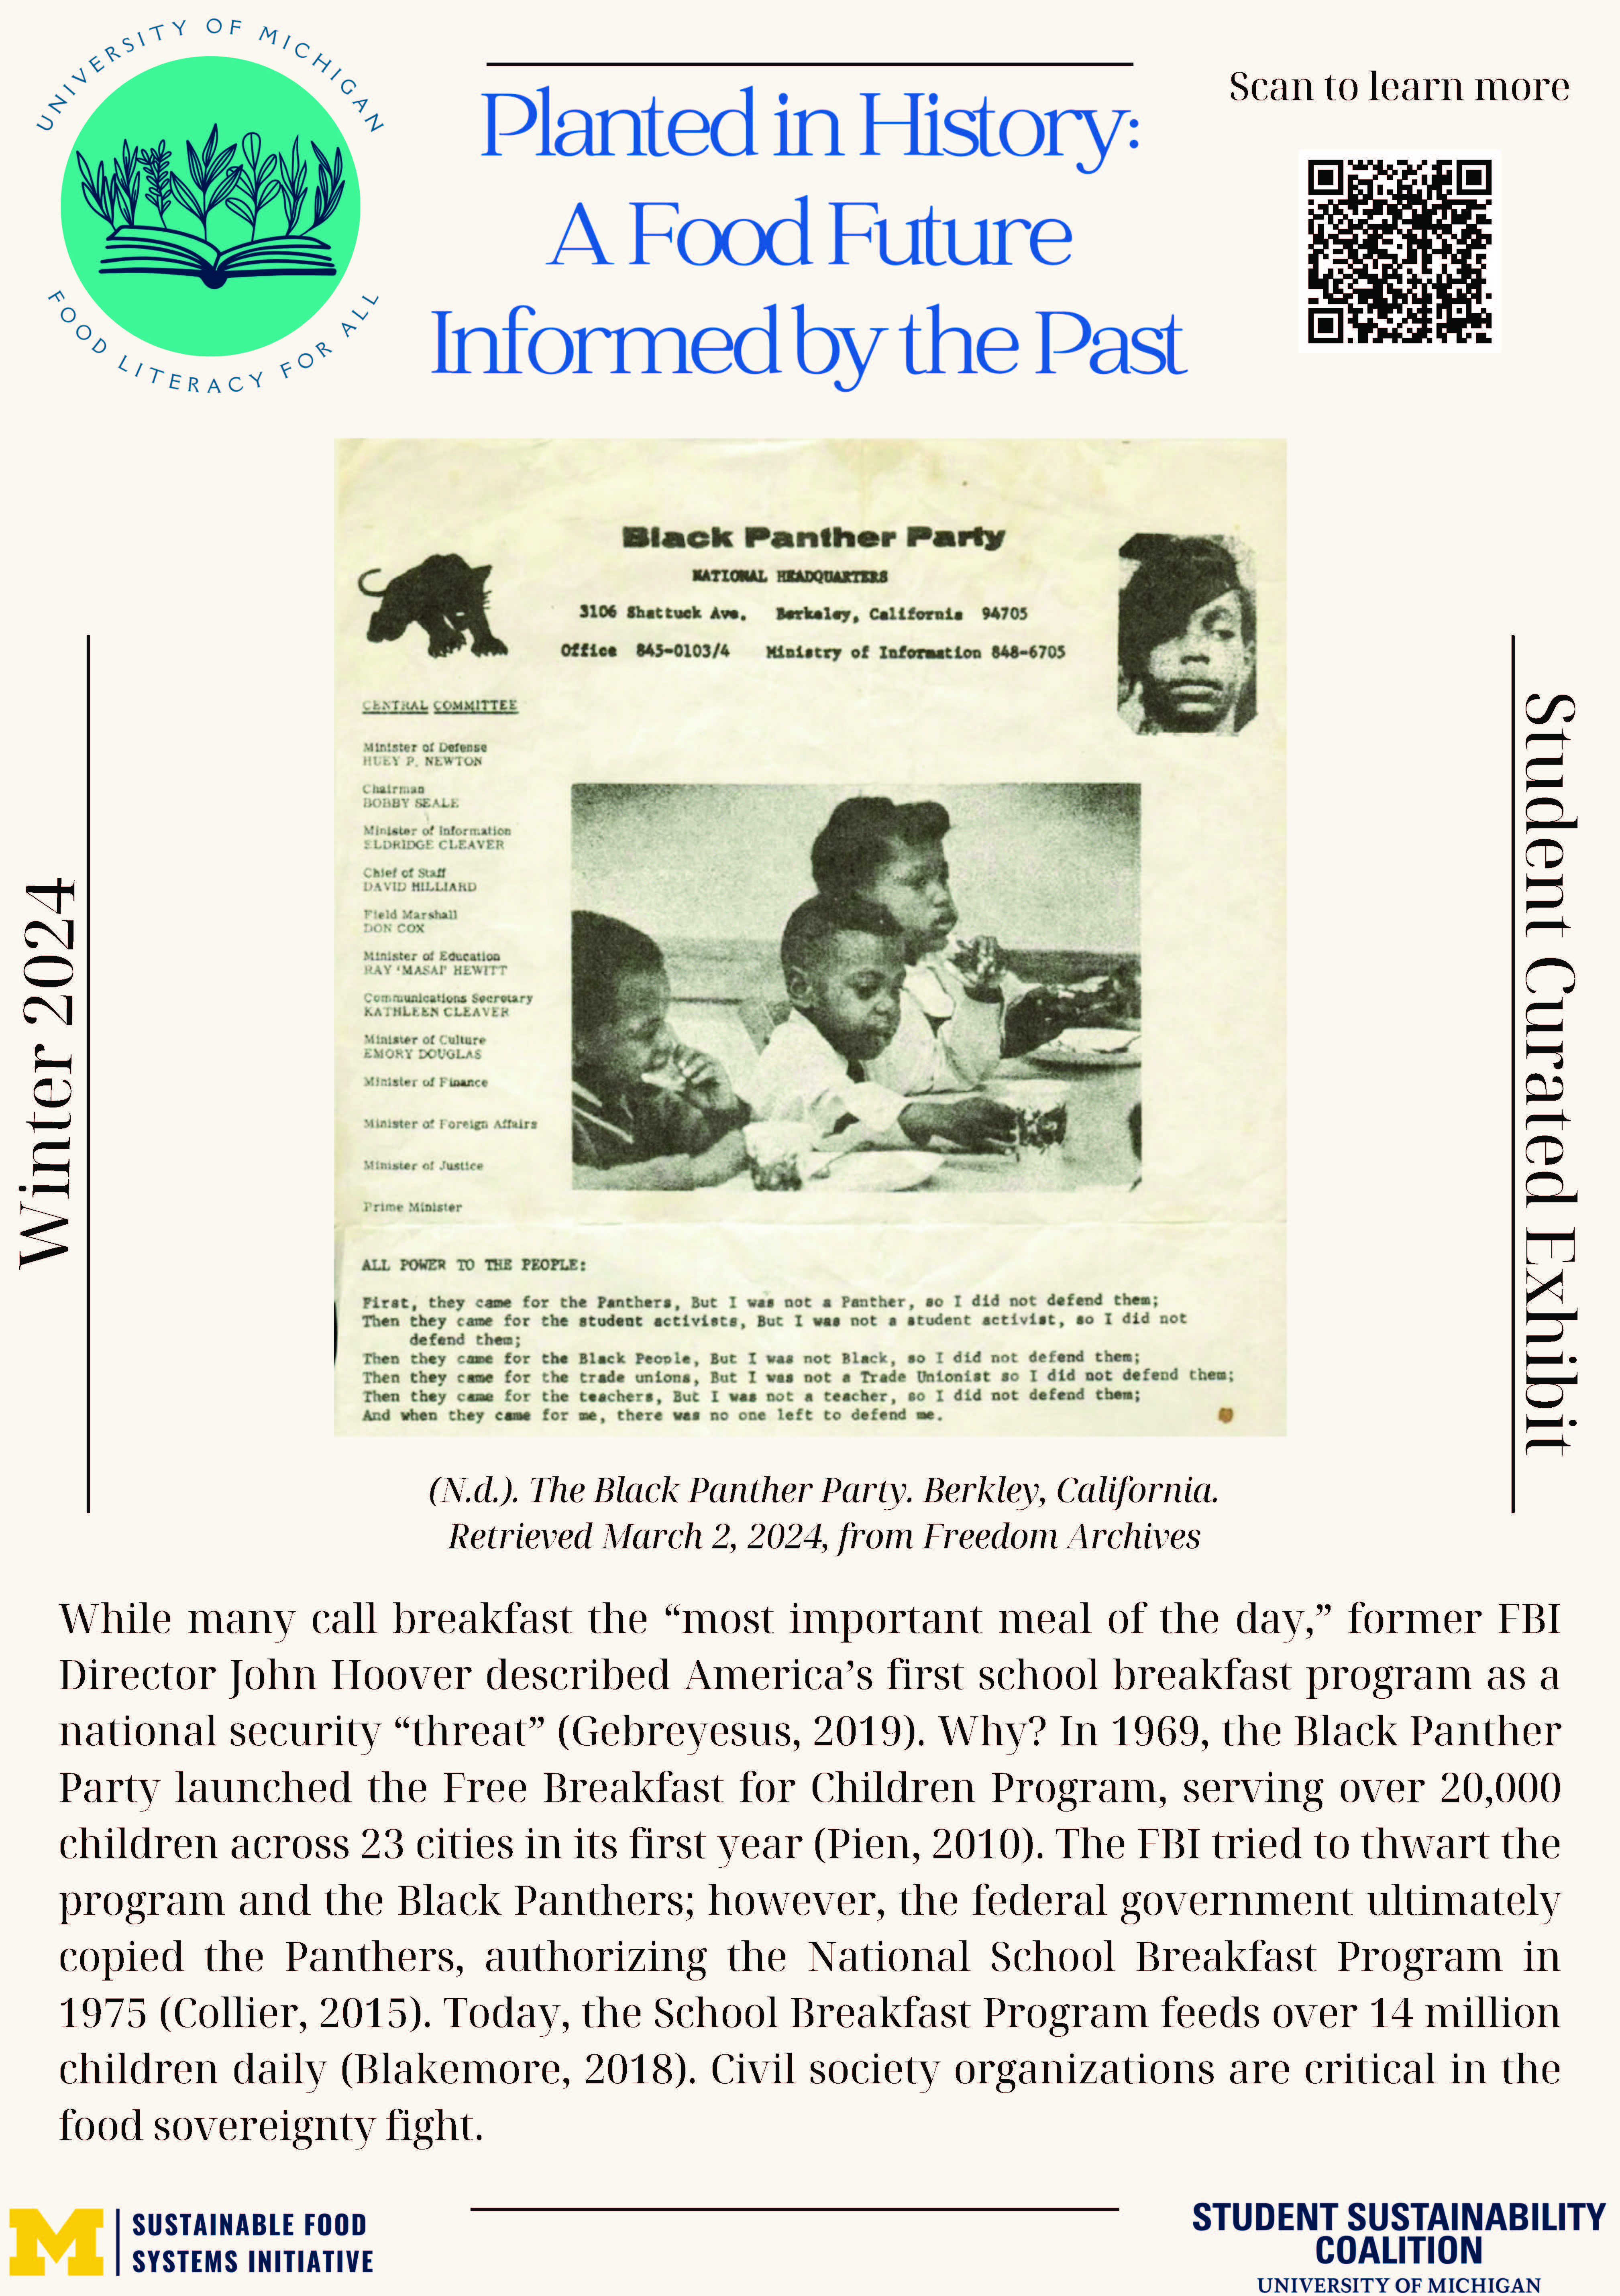 Poster highlighting a typed document from the Black Panther Party National Headquarters featuring a photograph of three black children enjoying breakfast, drawn from the Freedom Archives. Main text included in caption.